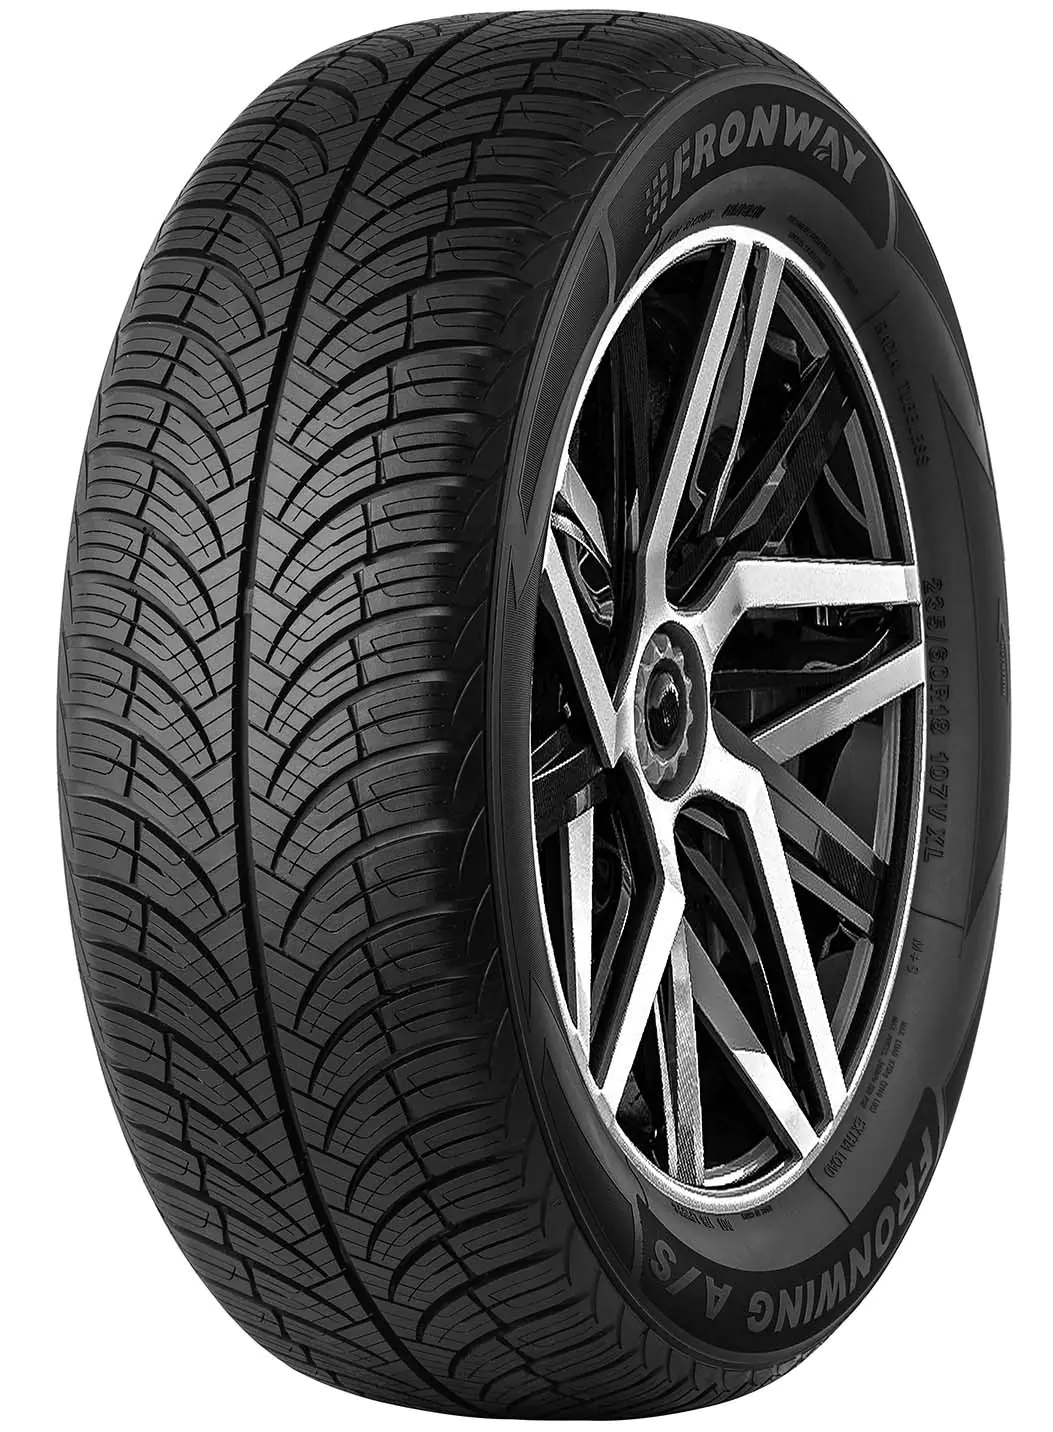 Gomme Autovettura Fronway 145/70 R13 71T FRONWING A/S M+S All Season